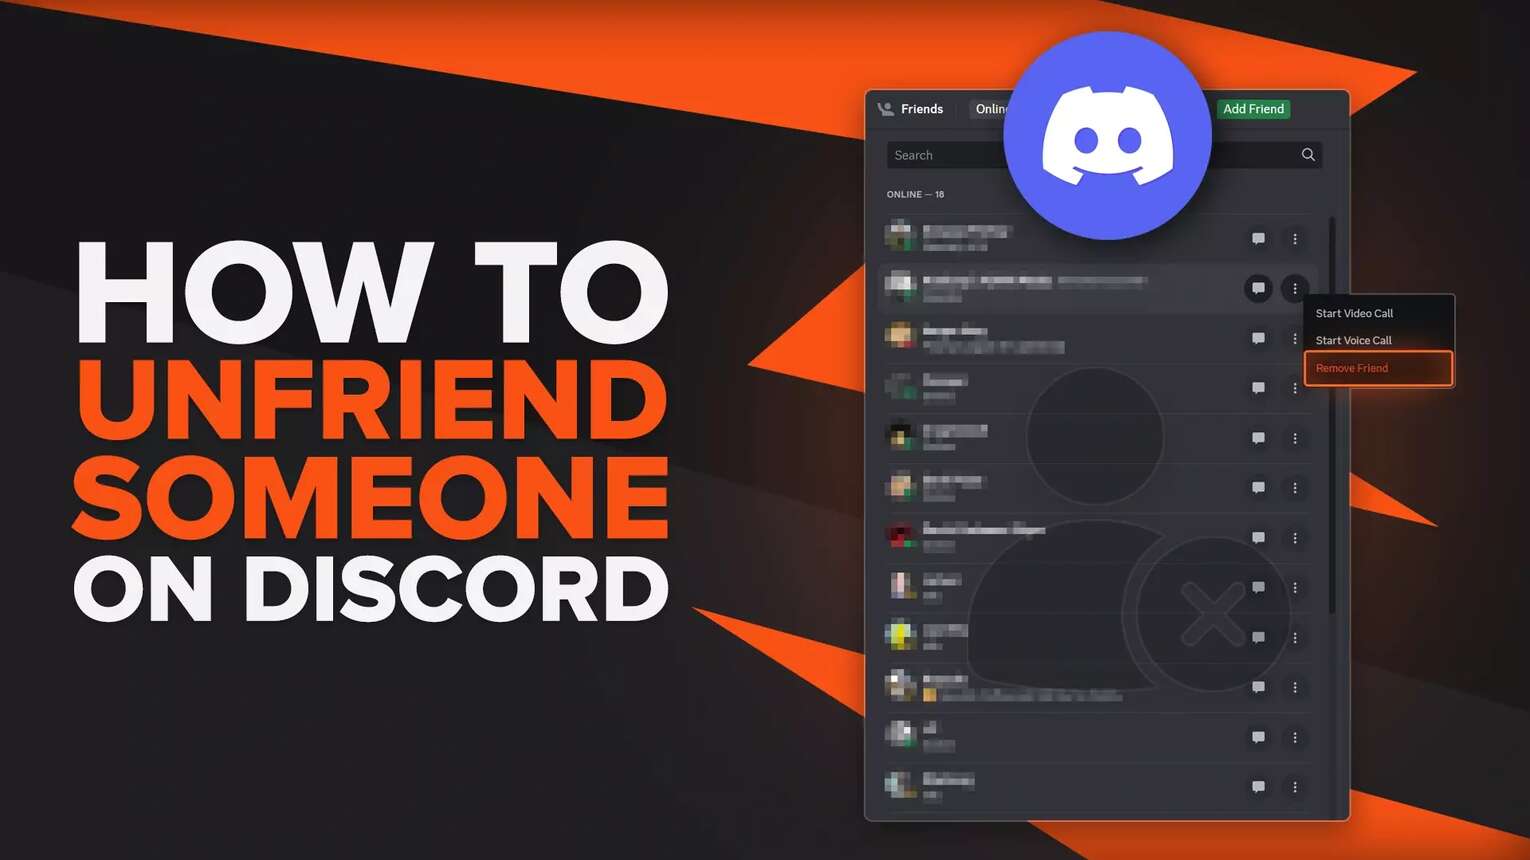 How To Unfriend Someone On Discord [Step-By-Step Guide]